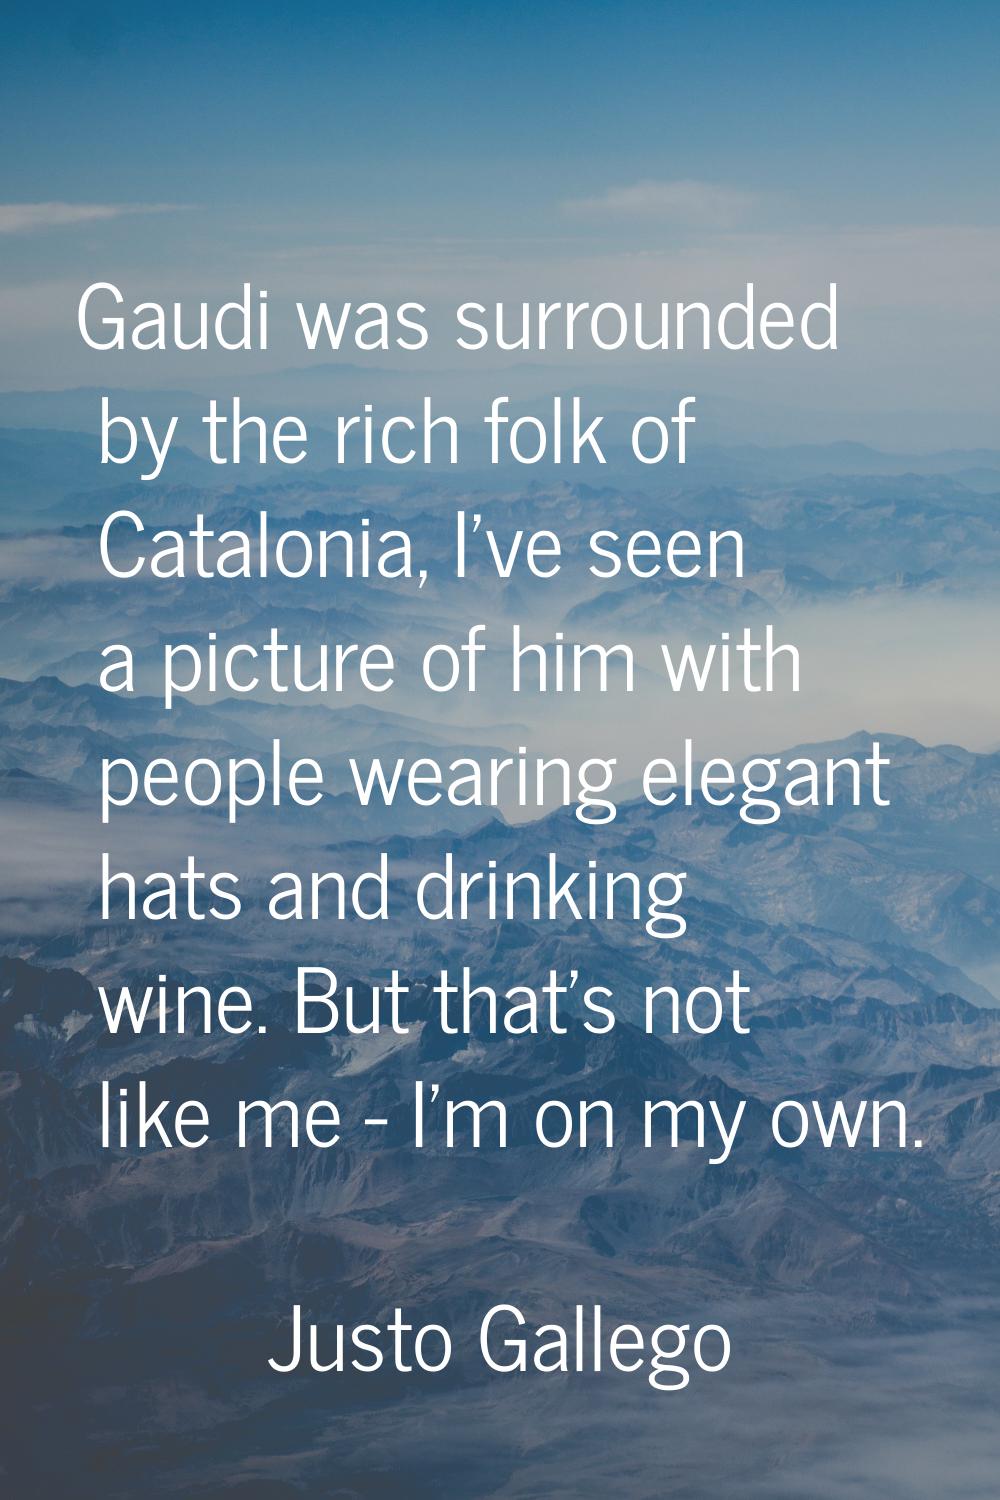 Gaudi was surrounded by the rich folk of Catalonia, I've seen a picture of him with people wearing 